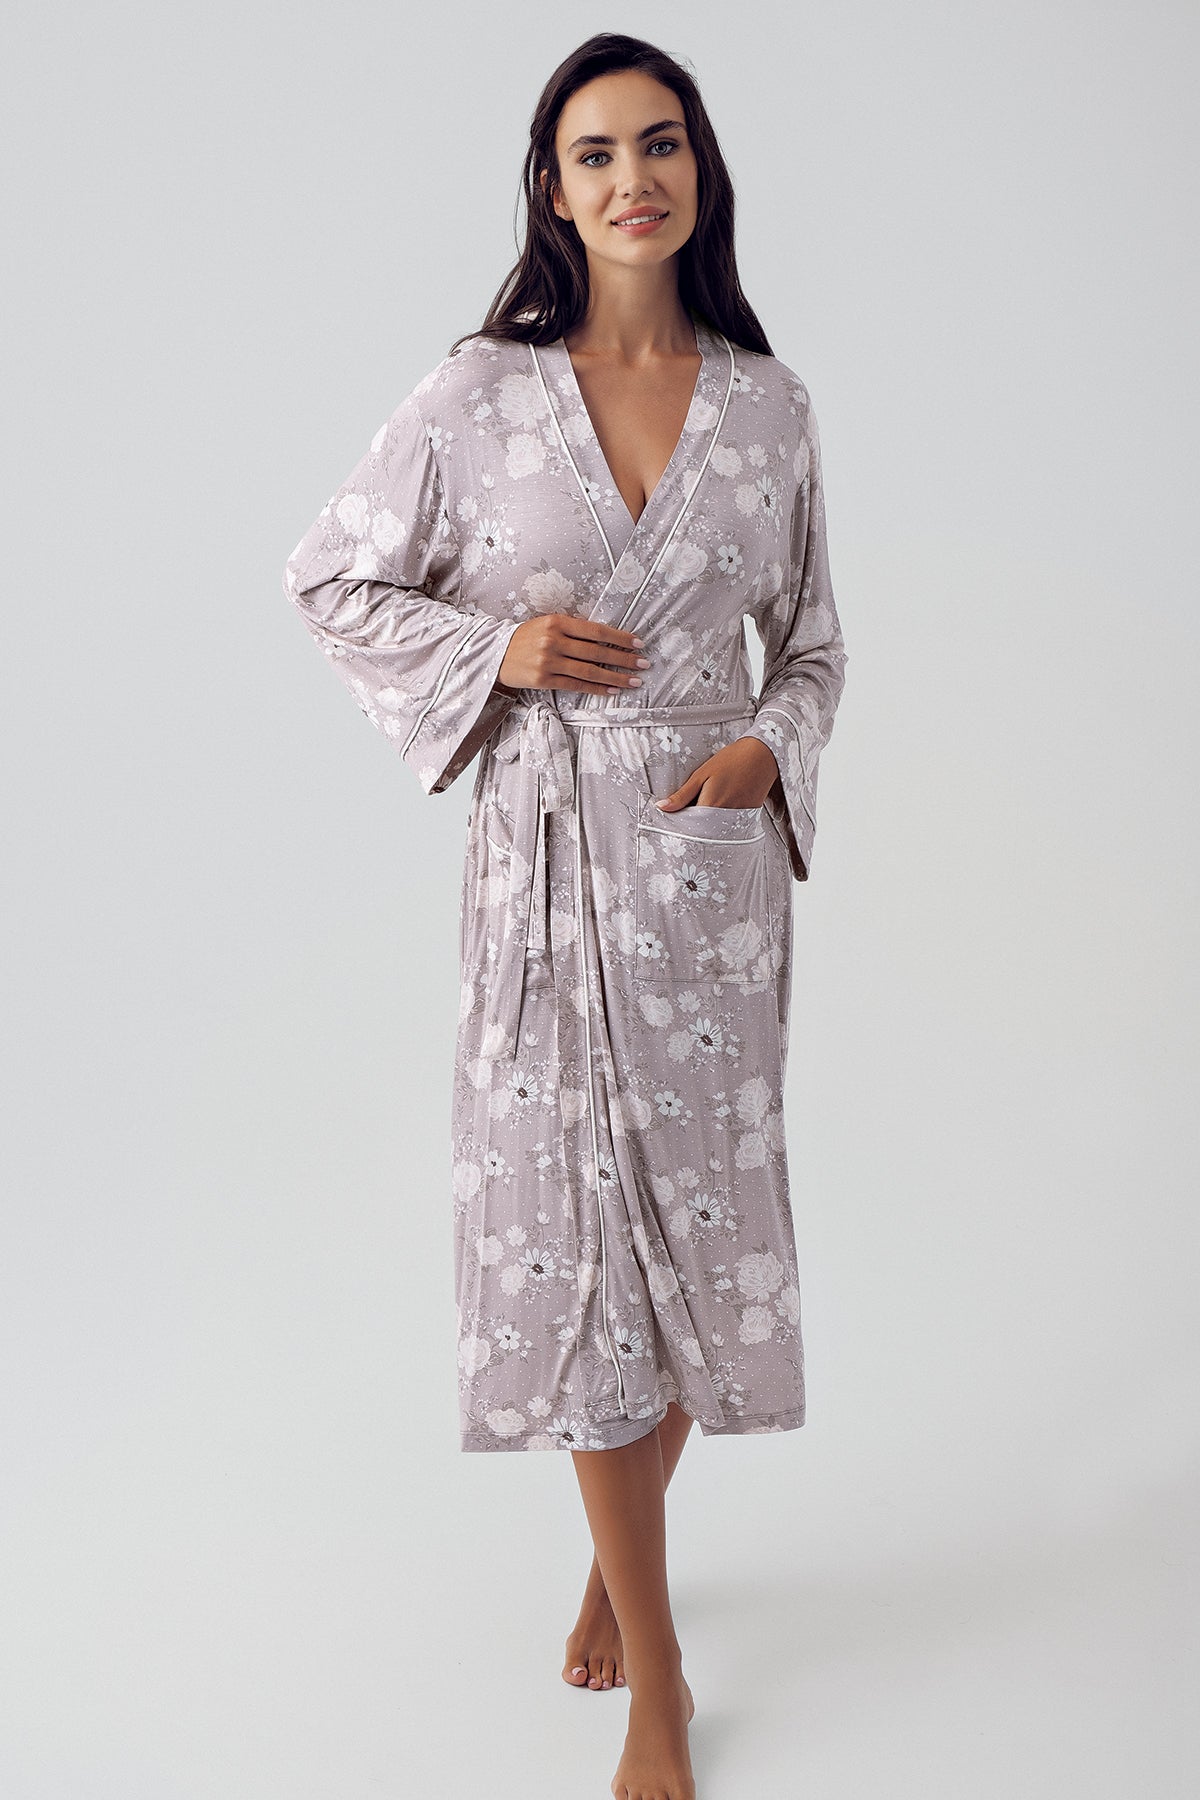 Polka Dot Maternity & Nursing Nightgown With Flower Patterned Robe Coffee - 15404